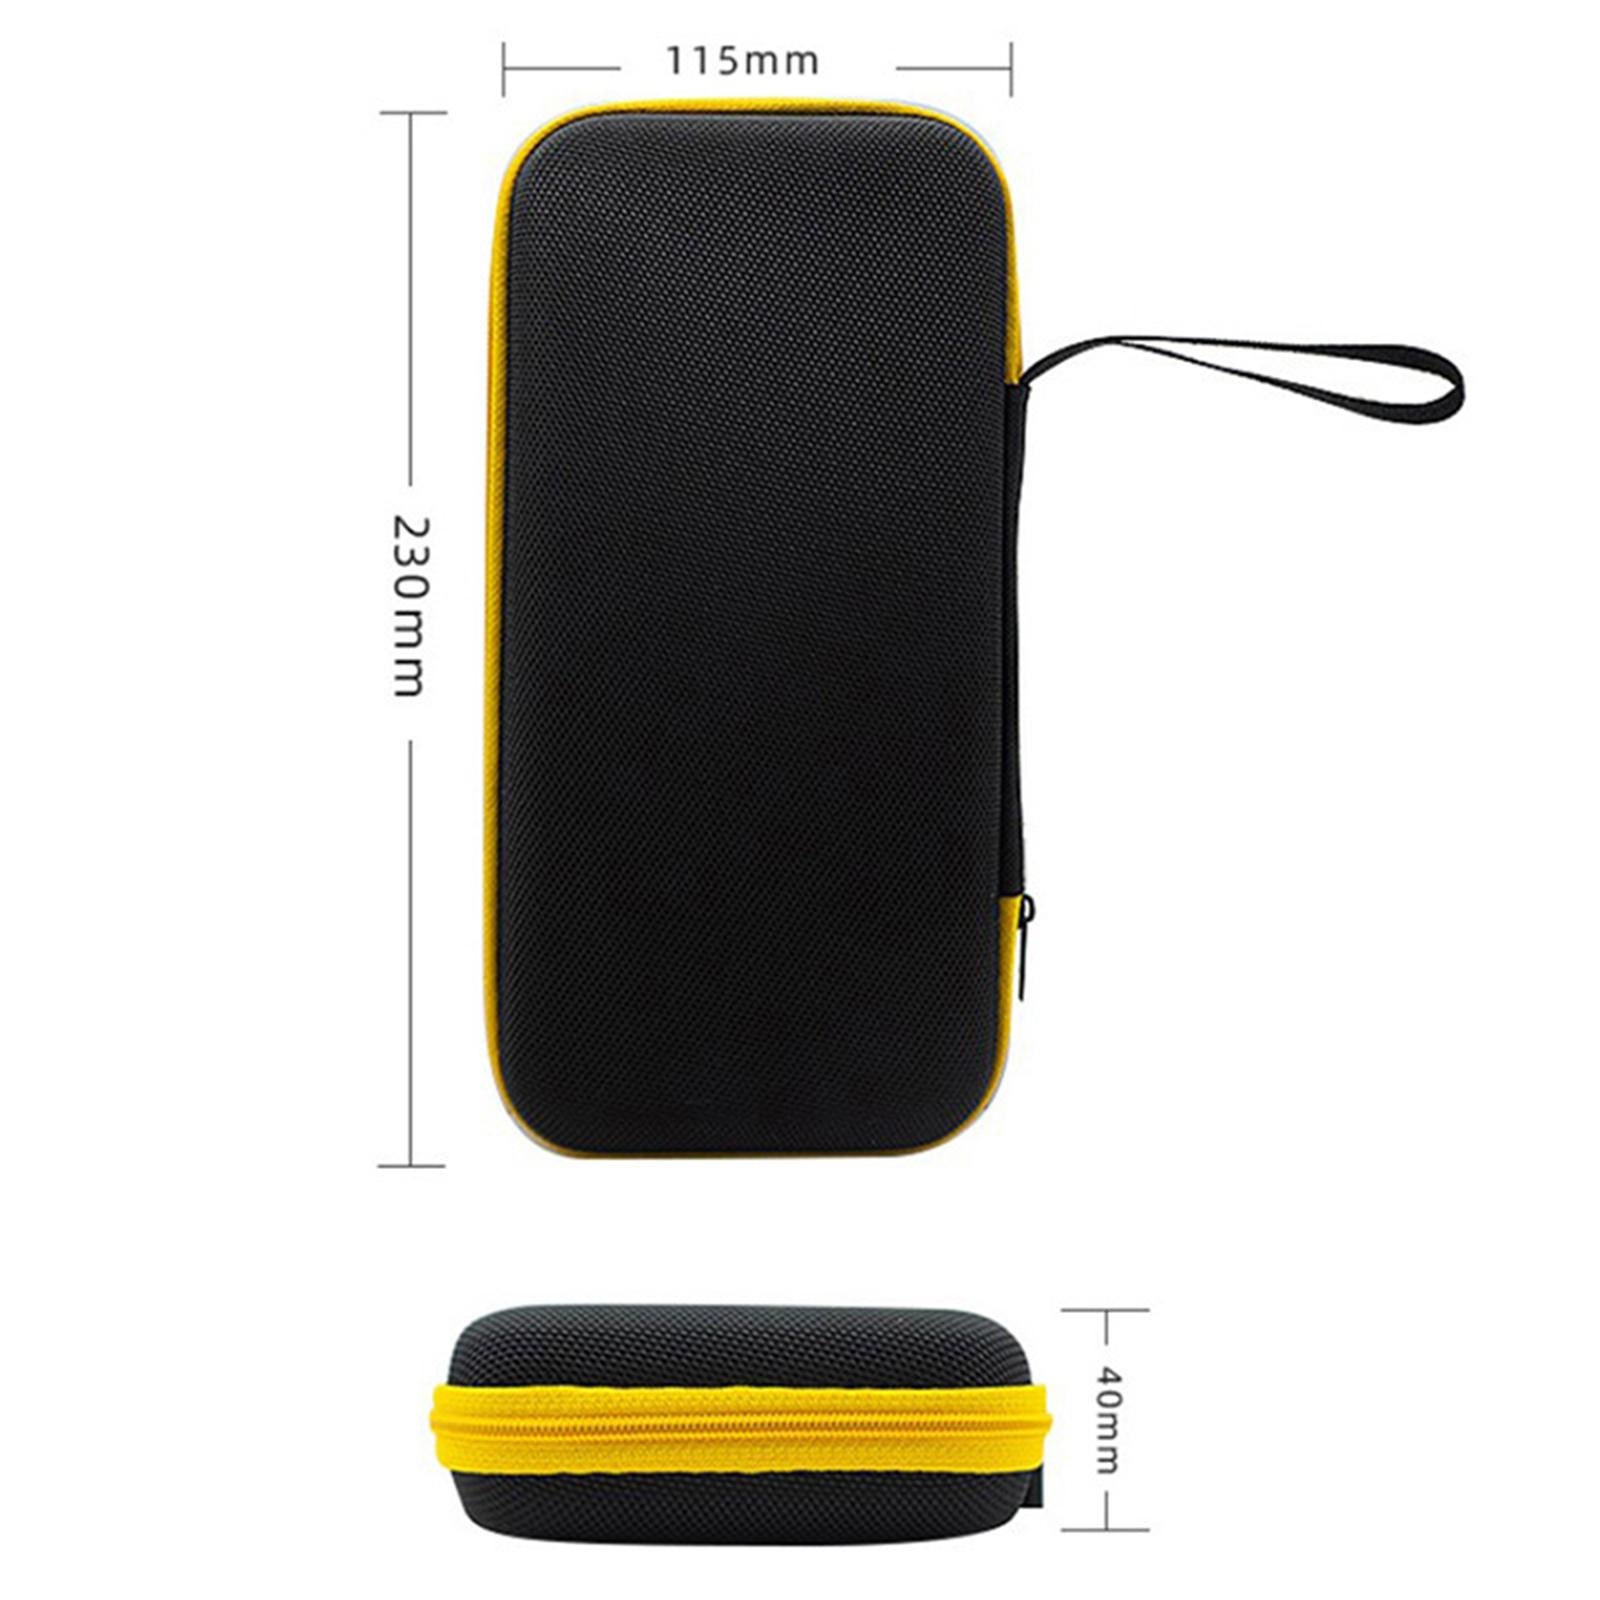 Shockproof Carrying Case Travel Zipper Accessories for Pocket 3 Game Console